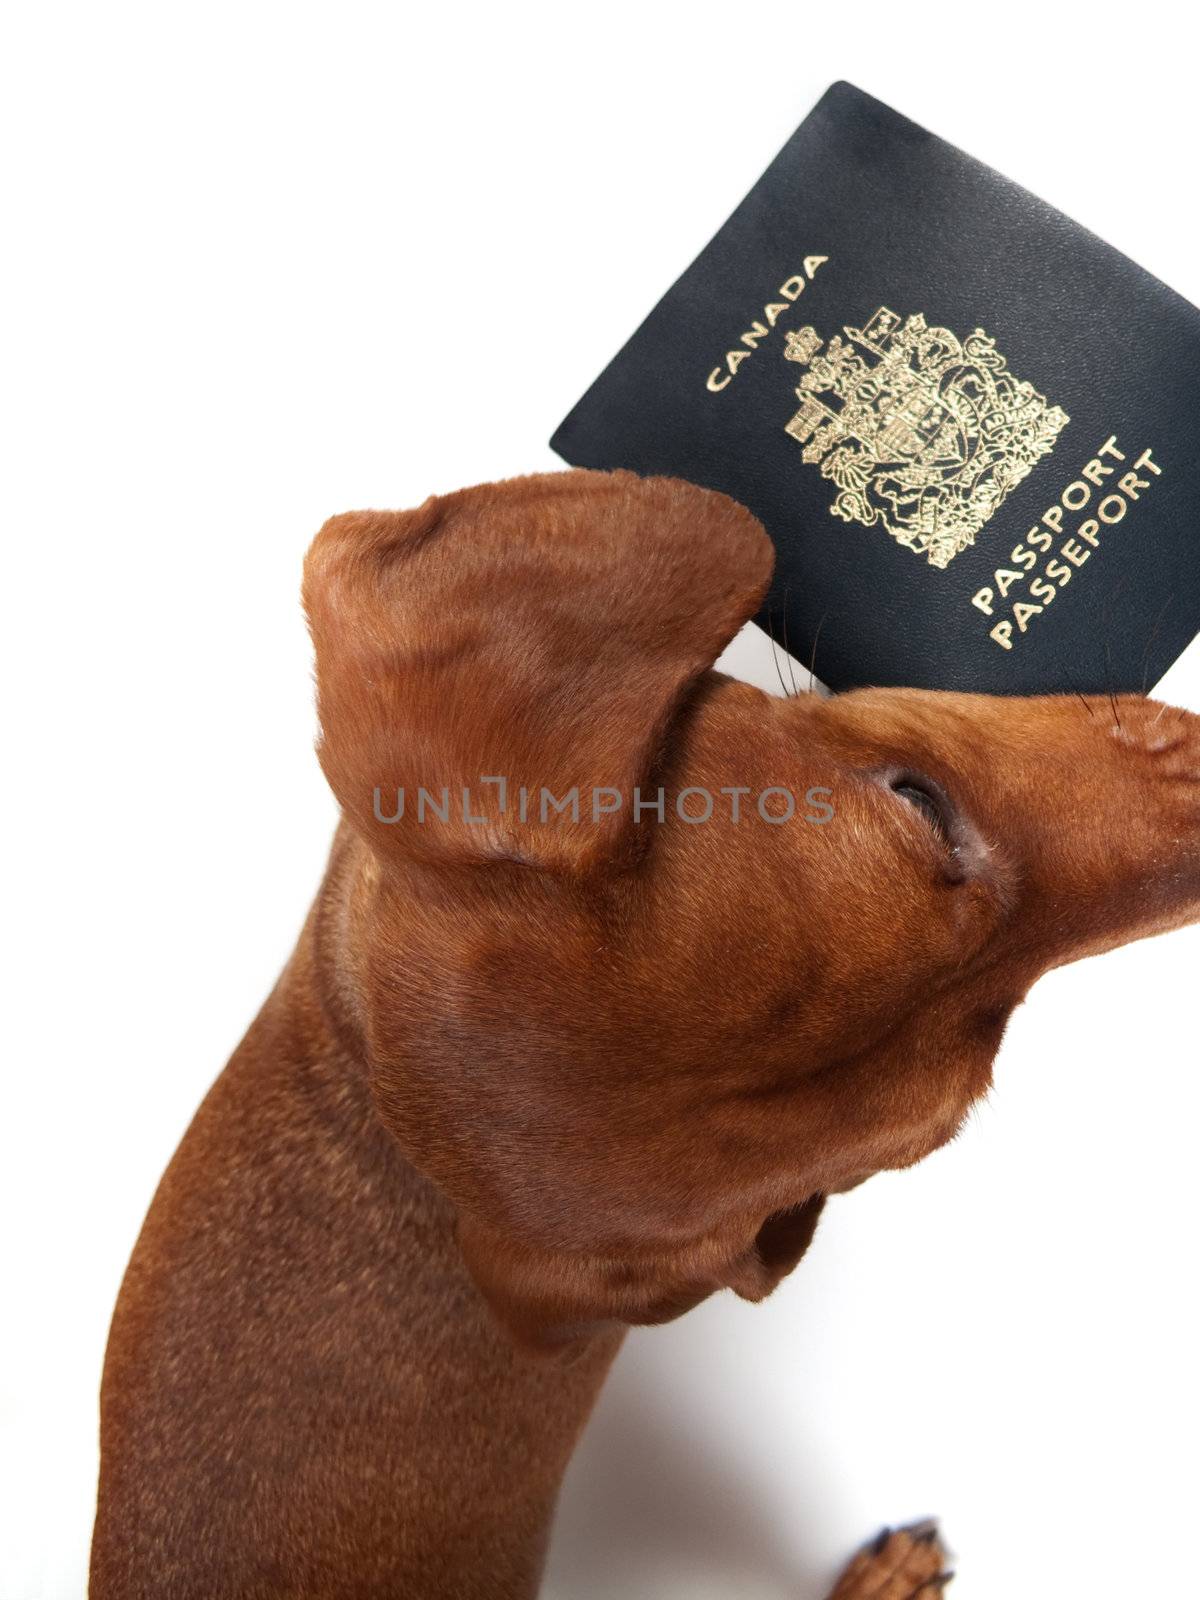 Dachshund with passport in mouth by woodygraphs